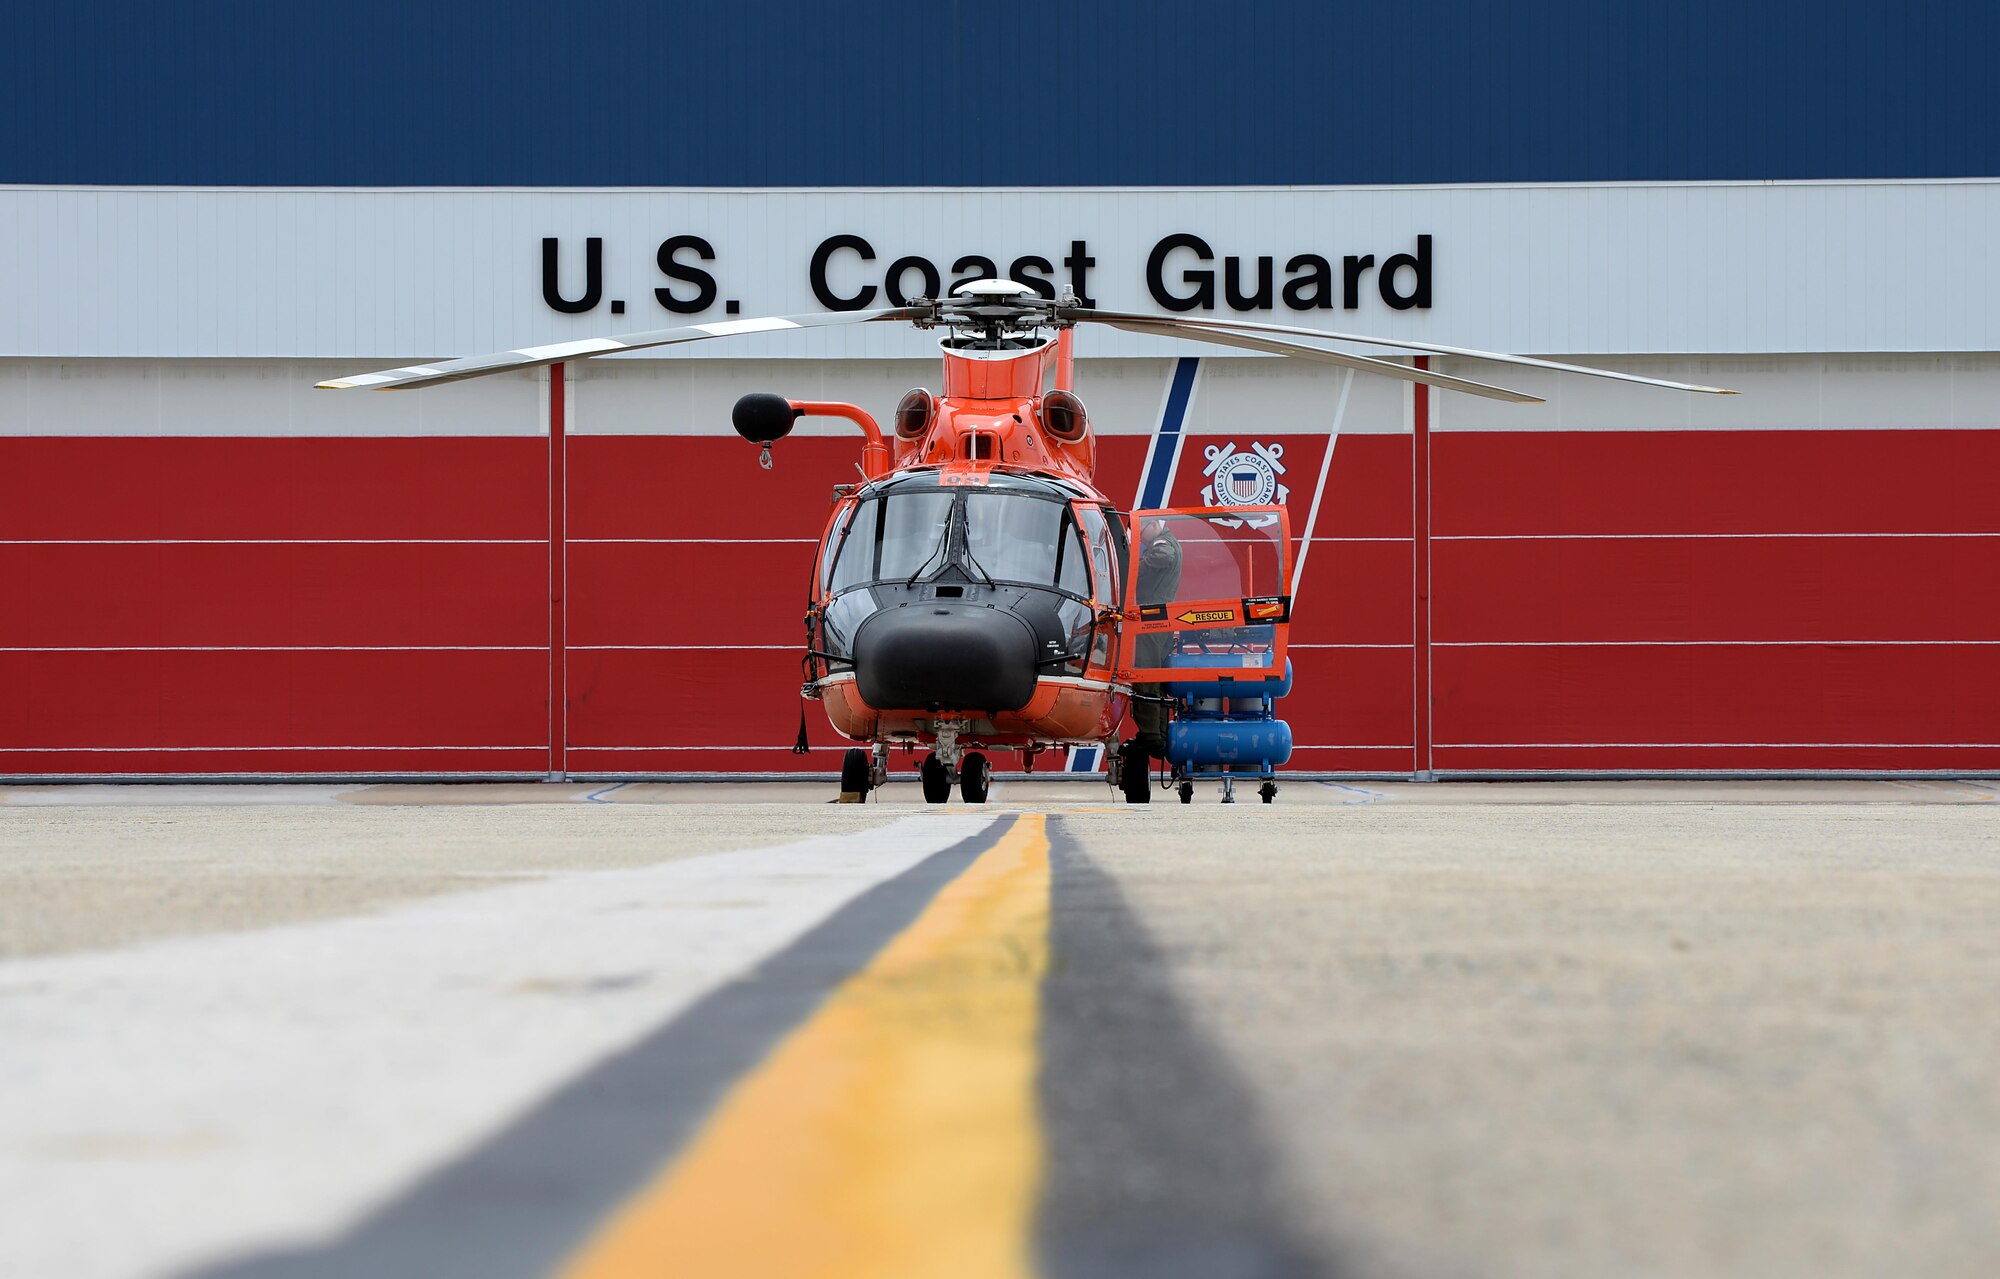 A U.S. Coast Guard HH-65C Dolphin crew member from Coast Guard Air Station Atlantic City preps his helicopter before an alert during a CrossTell training exercise at the Atlantic City International Airport, N.J., May 24, 2017. Air National units from New Jersey, South Carolina and Washington D.C. participated in training and familiarization exercises with the U.S. Coast Guard and Civil Air Patrol during the three-day CrossTell to increase awareness of the Aerospace Control Alert mission. (U.S. Air National Guard photo by Airman 1st Class Cristina J. Allen/Released)